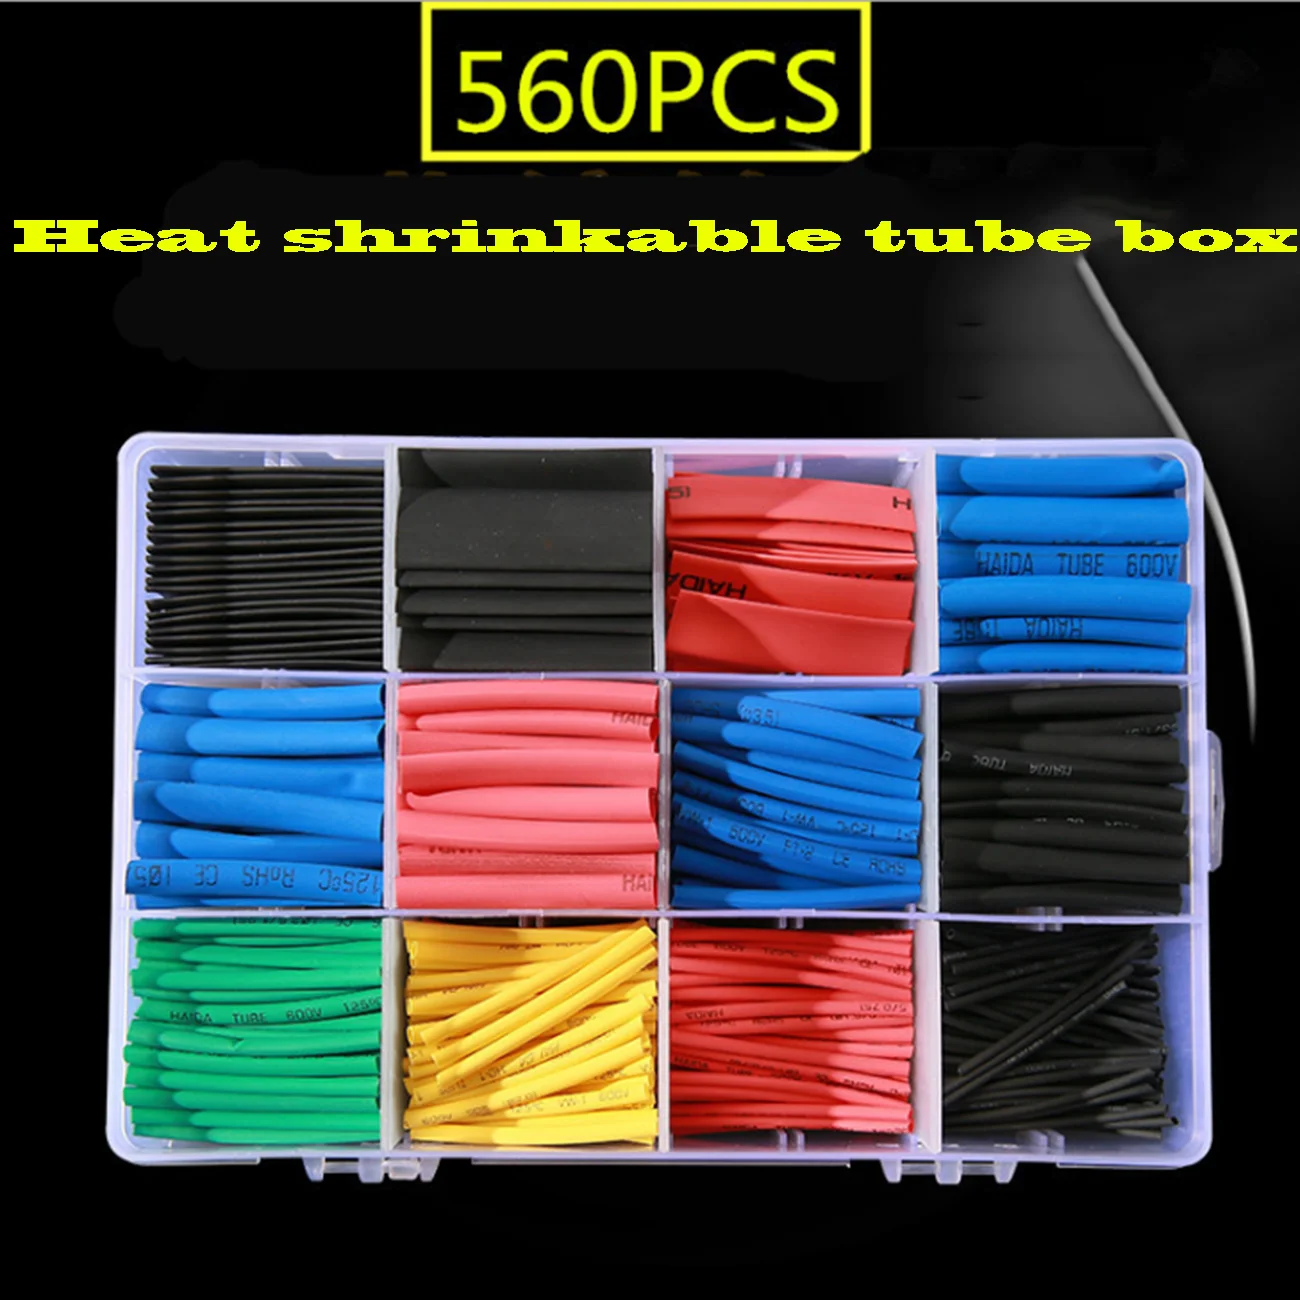 560PCS Heat Shrink Tubing 2:1,Electrical Wire Cable Wrap Assortment Electric Insulation Heat Shrink Tube Kit with Box 